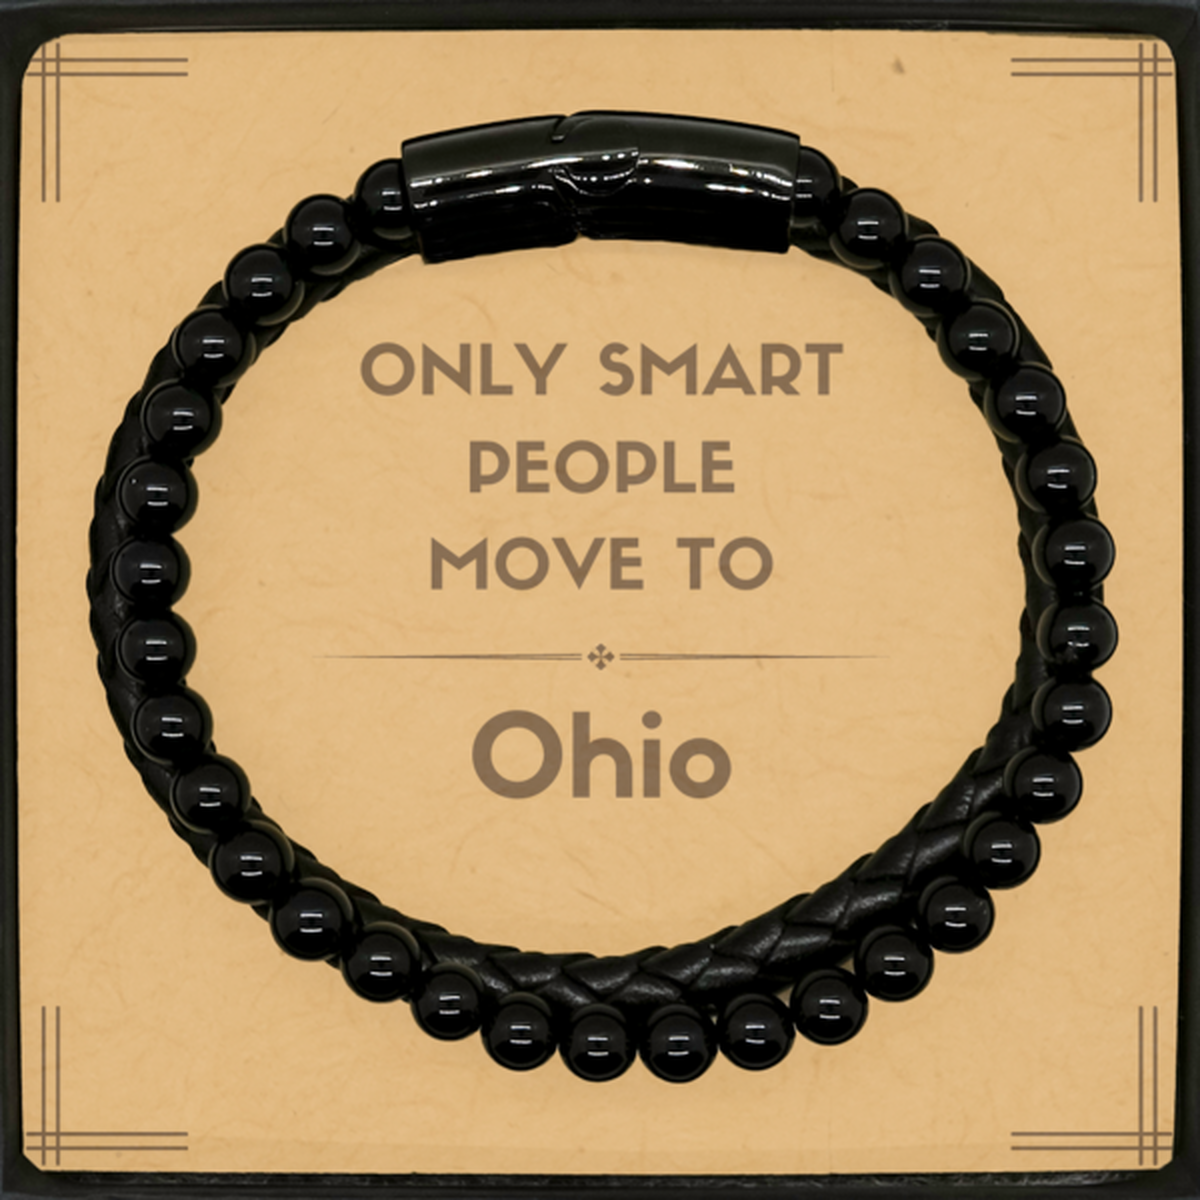 Only smart people move to Ohio Stone Leather Bracelets, Message Card Gifts For Ohio, Move to Ohio Gifts for Friends Coworker Funny Saying Quote